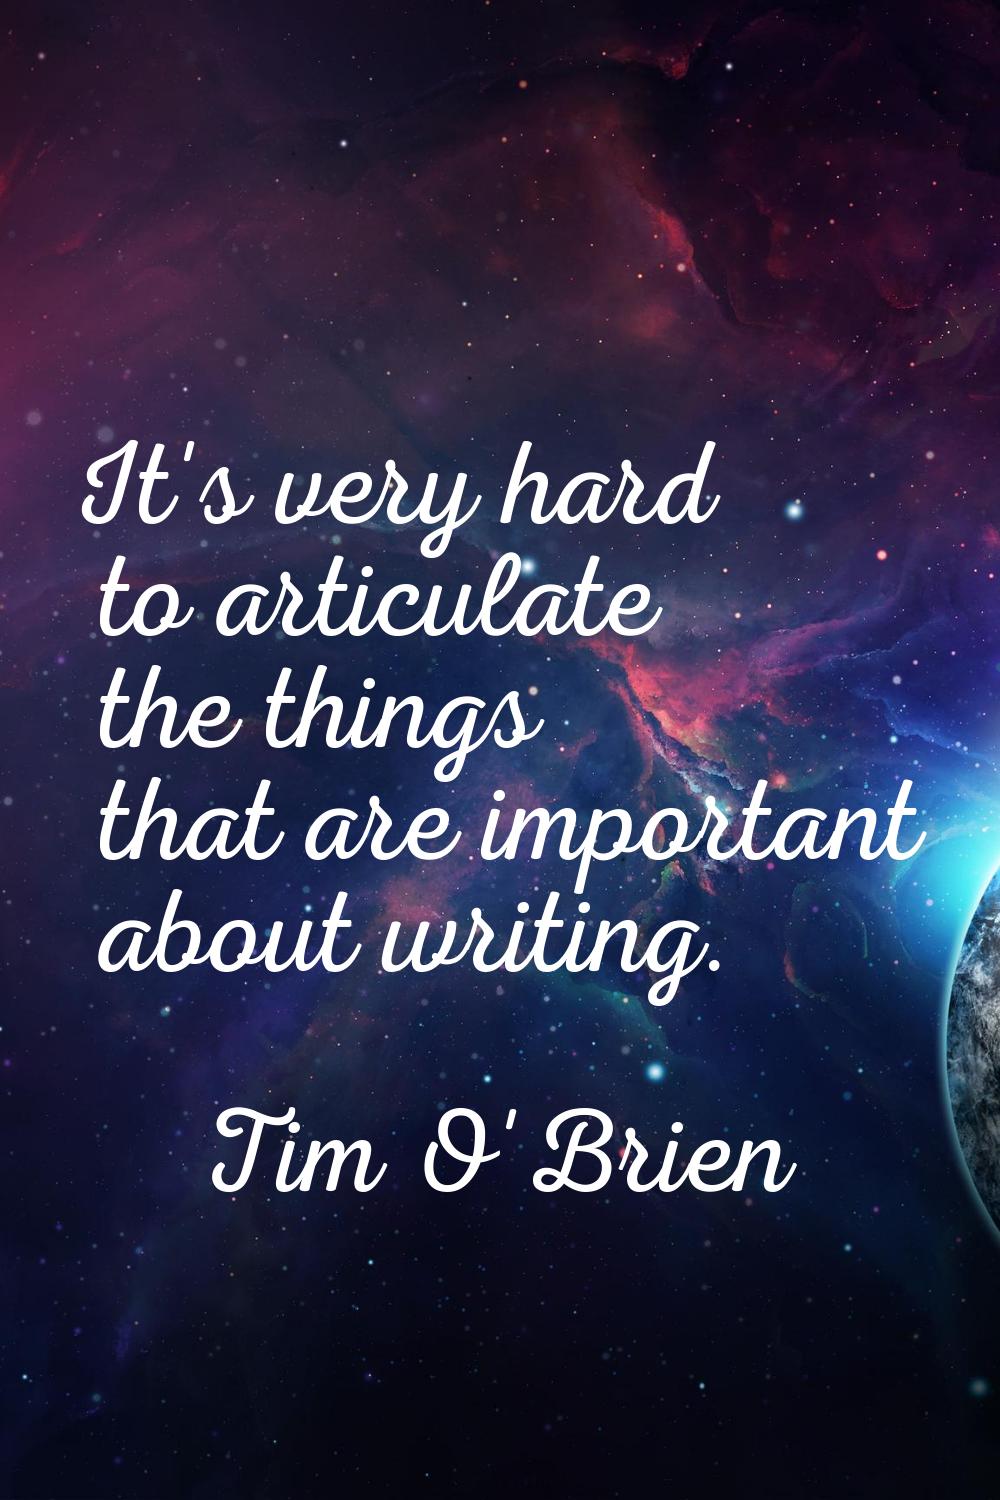 It's very hard to articulate the things that are important about writing.